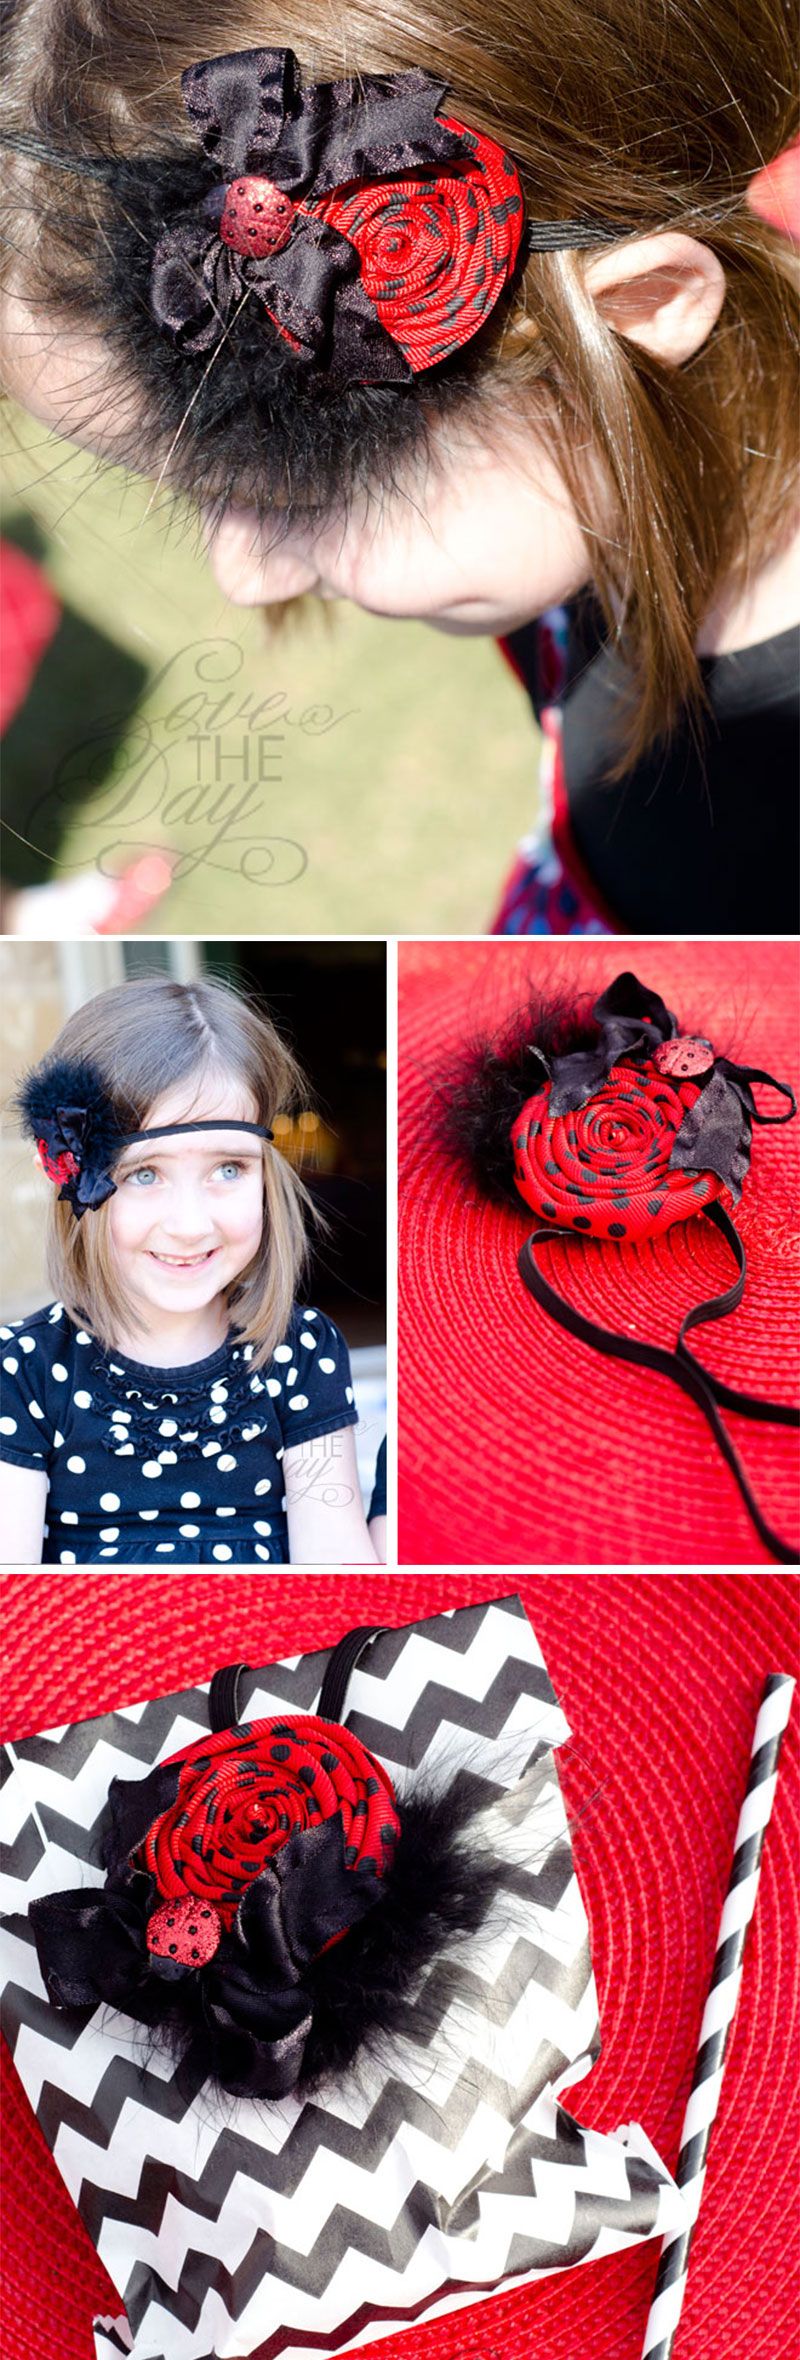 Ladybug Party Favors by Lindi Haws of Love The Day